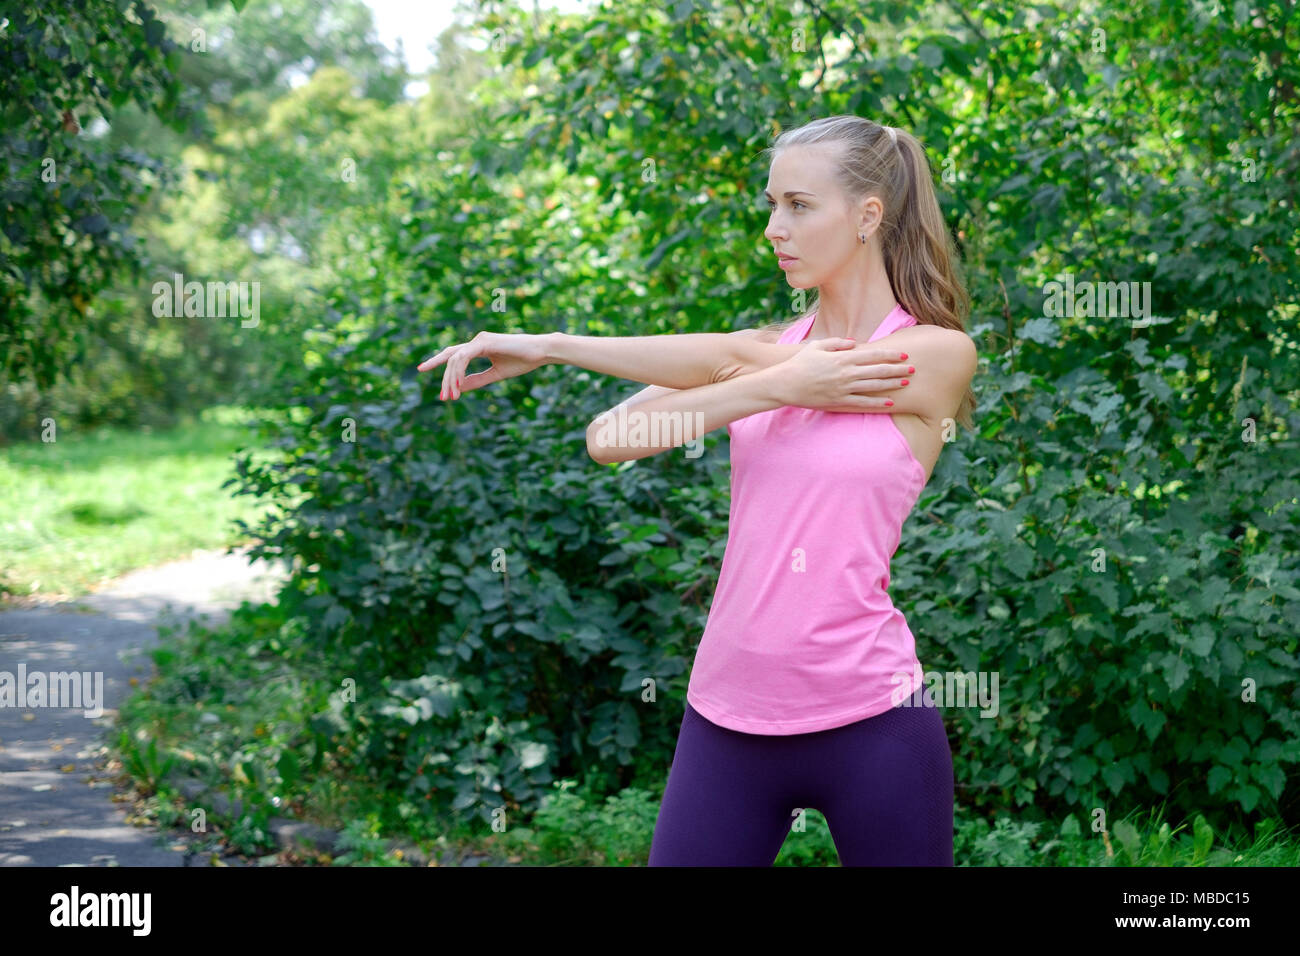 woman doing stretching exercise in park Stock Photo